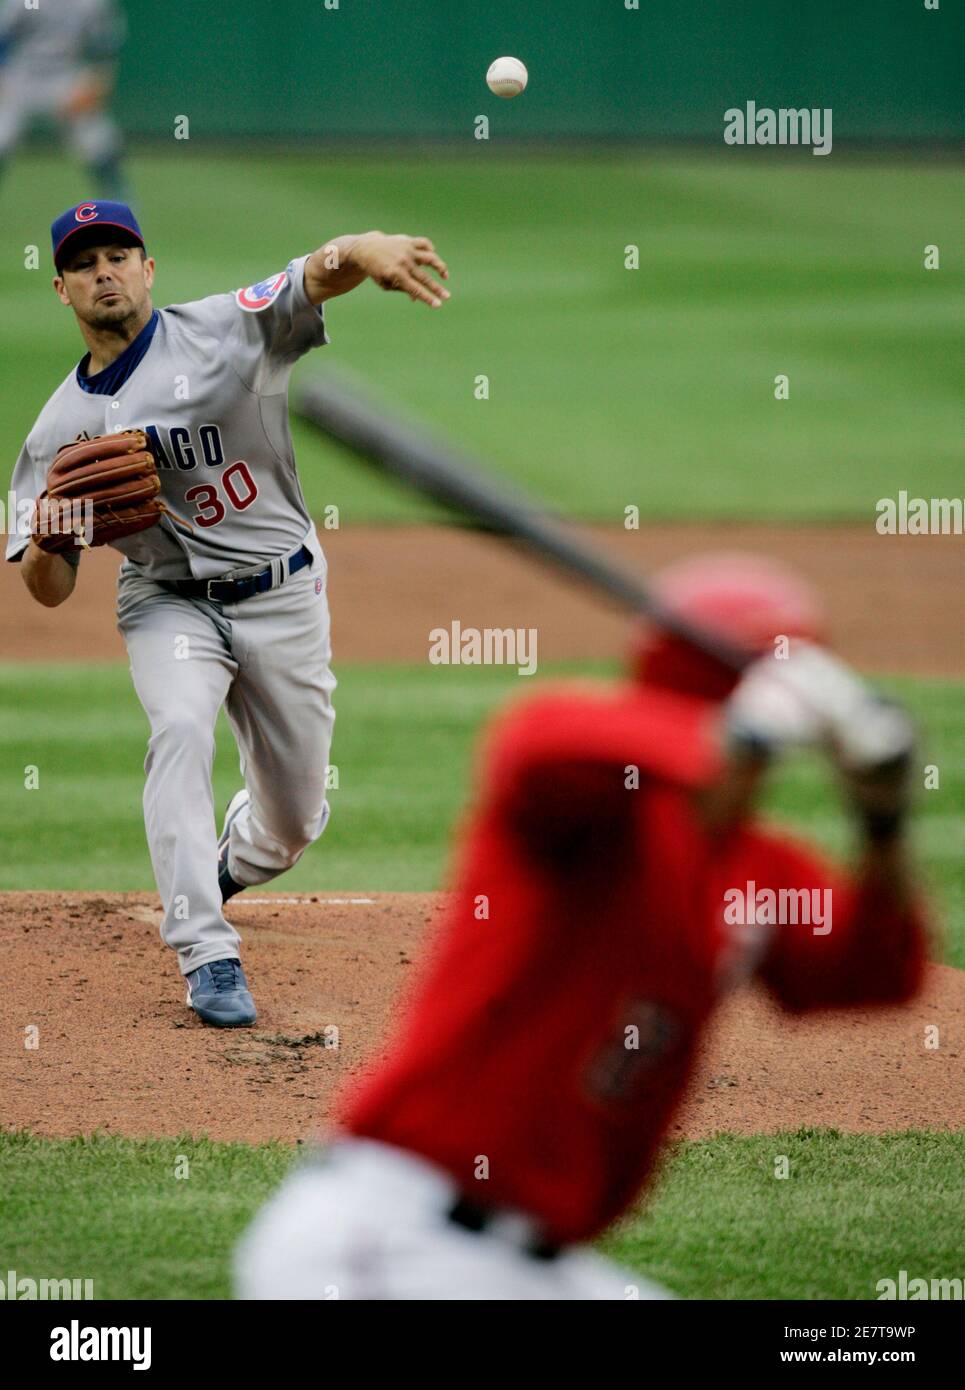 Chicago Cubs starting pitcher Ted Lilly (L) throws against Washington Nationals batter Cristian Guzman (R) in the first inning of their baseball game in Washington April 27, 2008.     REUTERS/Gary Cameron   (UNITED STATES) Stock Photo